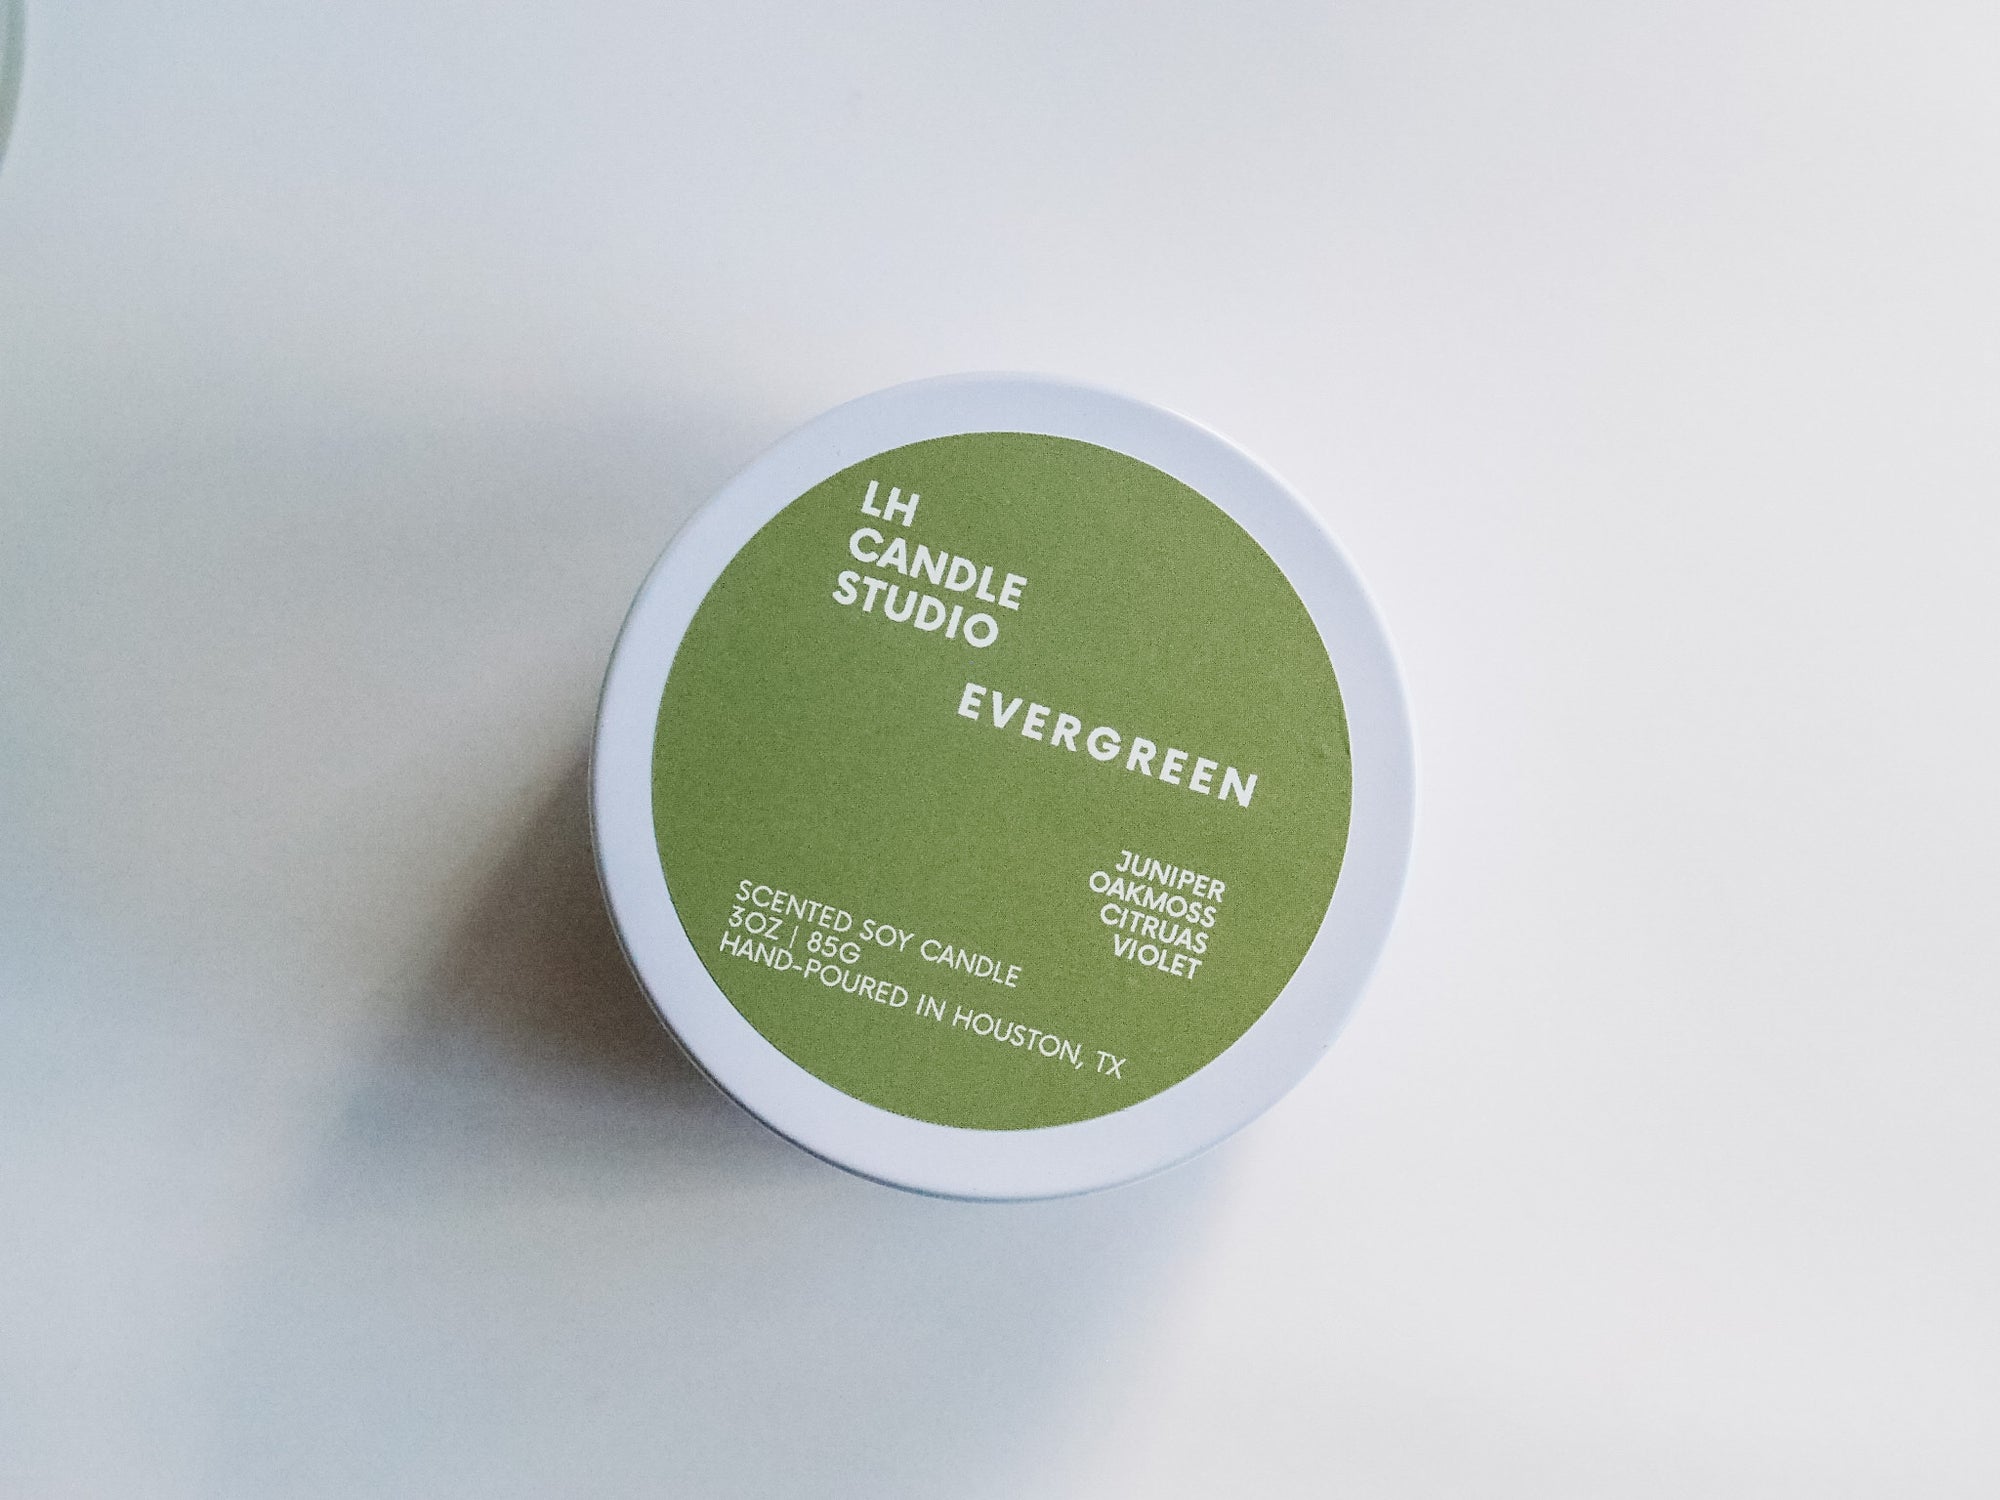 Evergreen Travel Tin Candle - LH CANDLE STUDIO